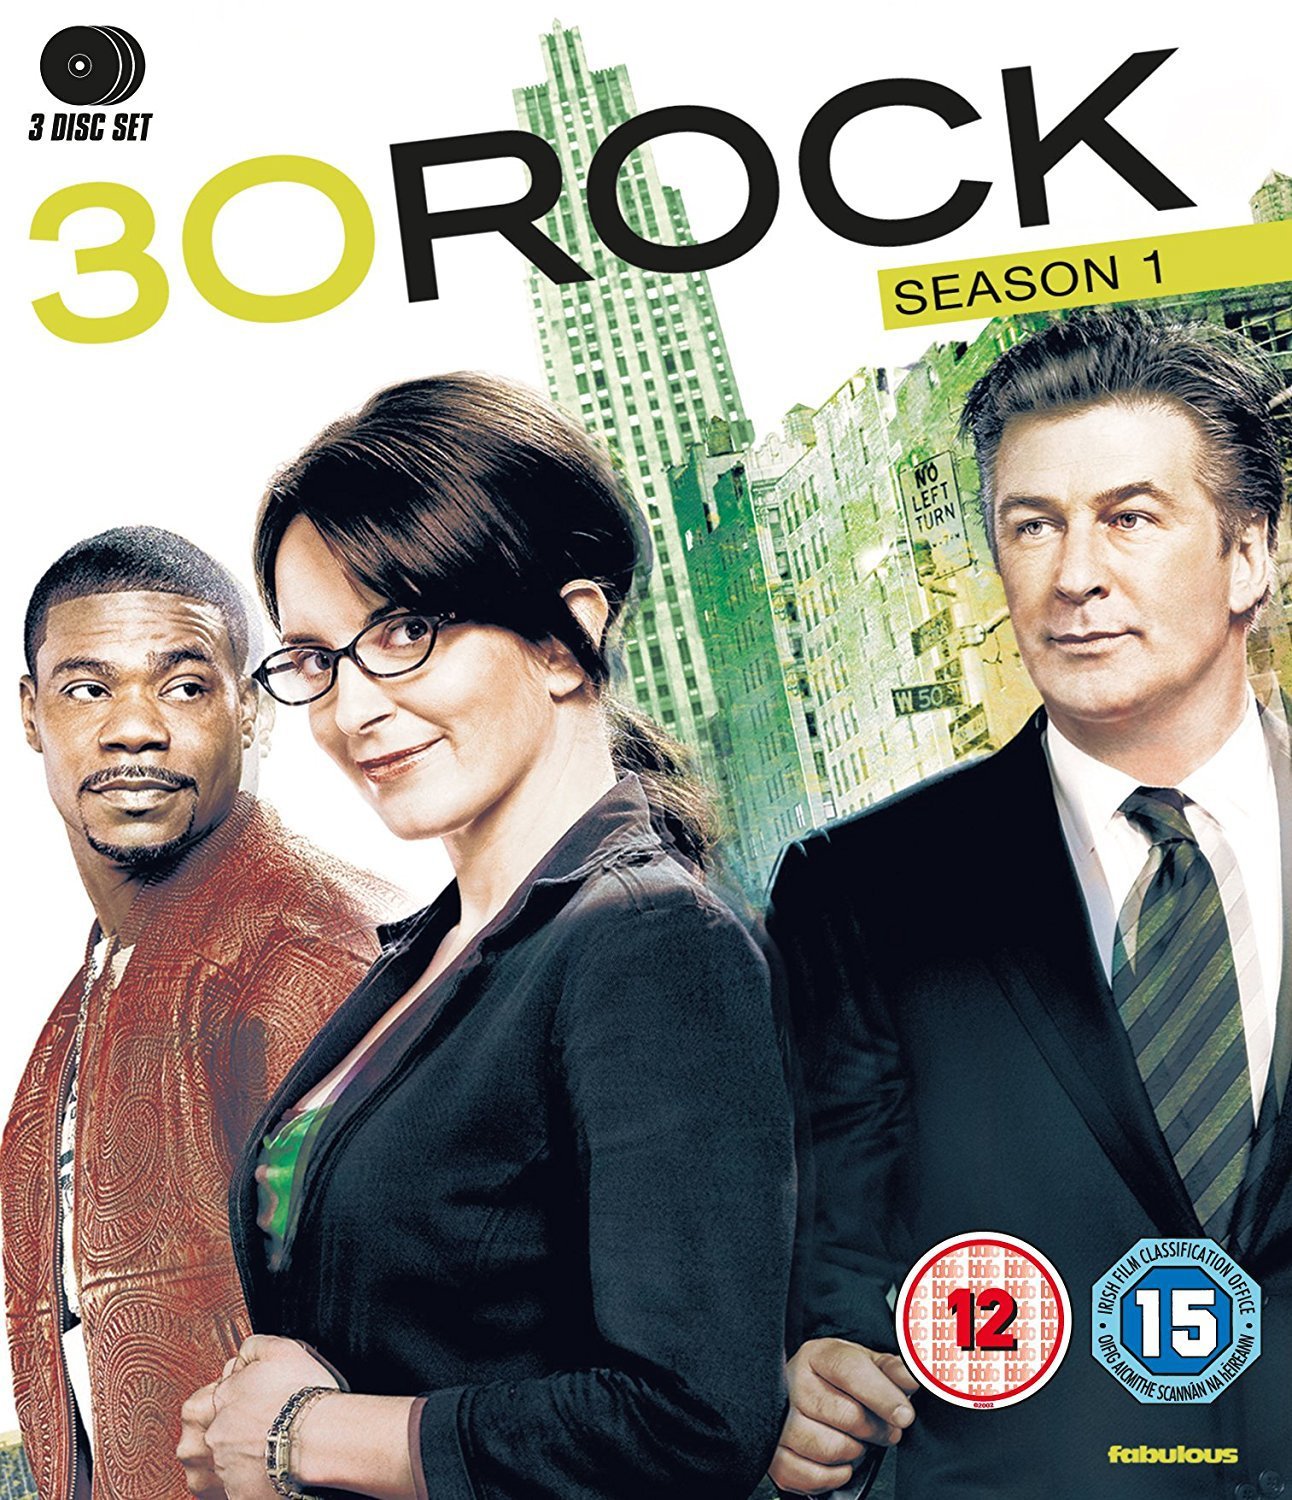 boom competitions - win 30 Rock (S1) on Blu-ray